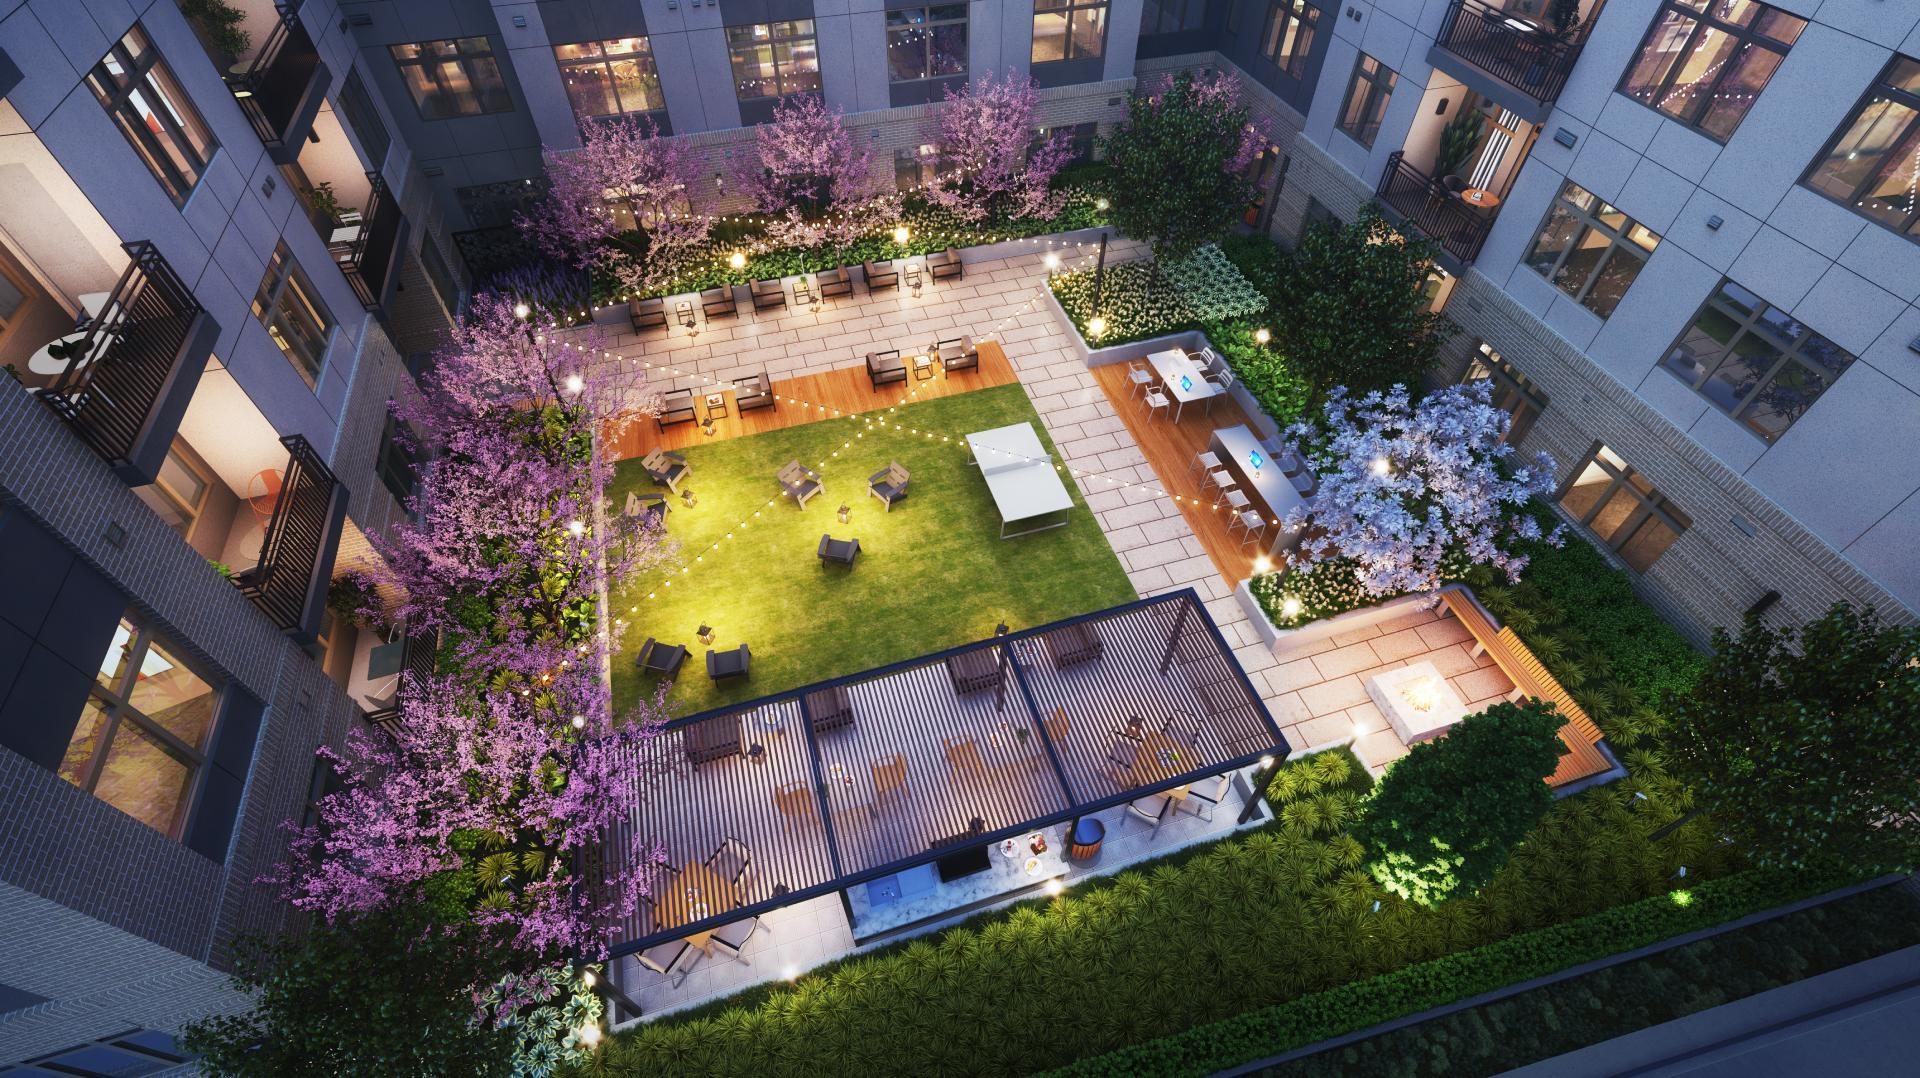 A rendering of the quiet courtyard at Coulter Place with landscaping and low-key lounge areas